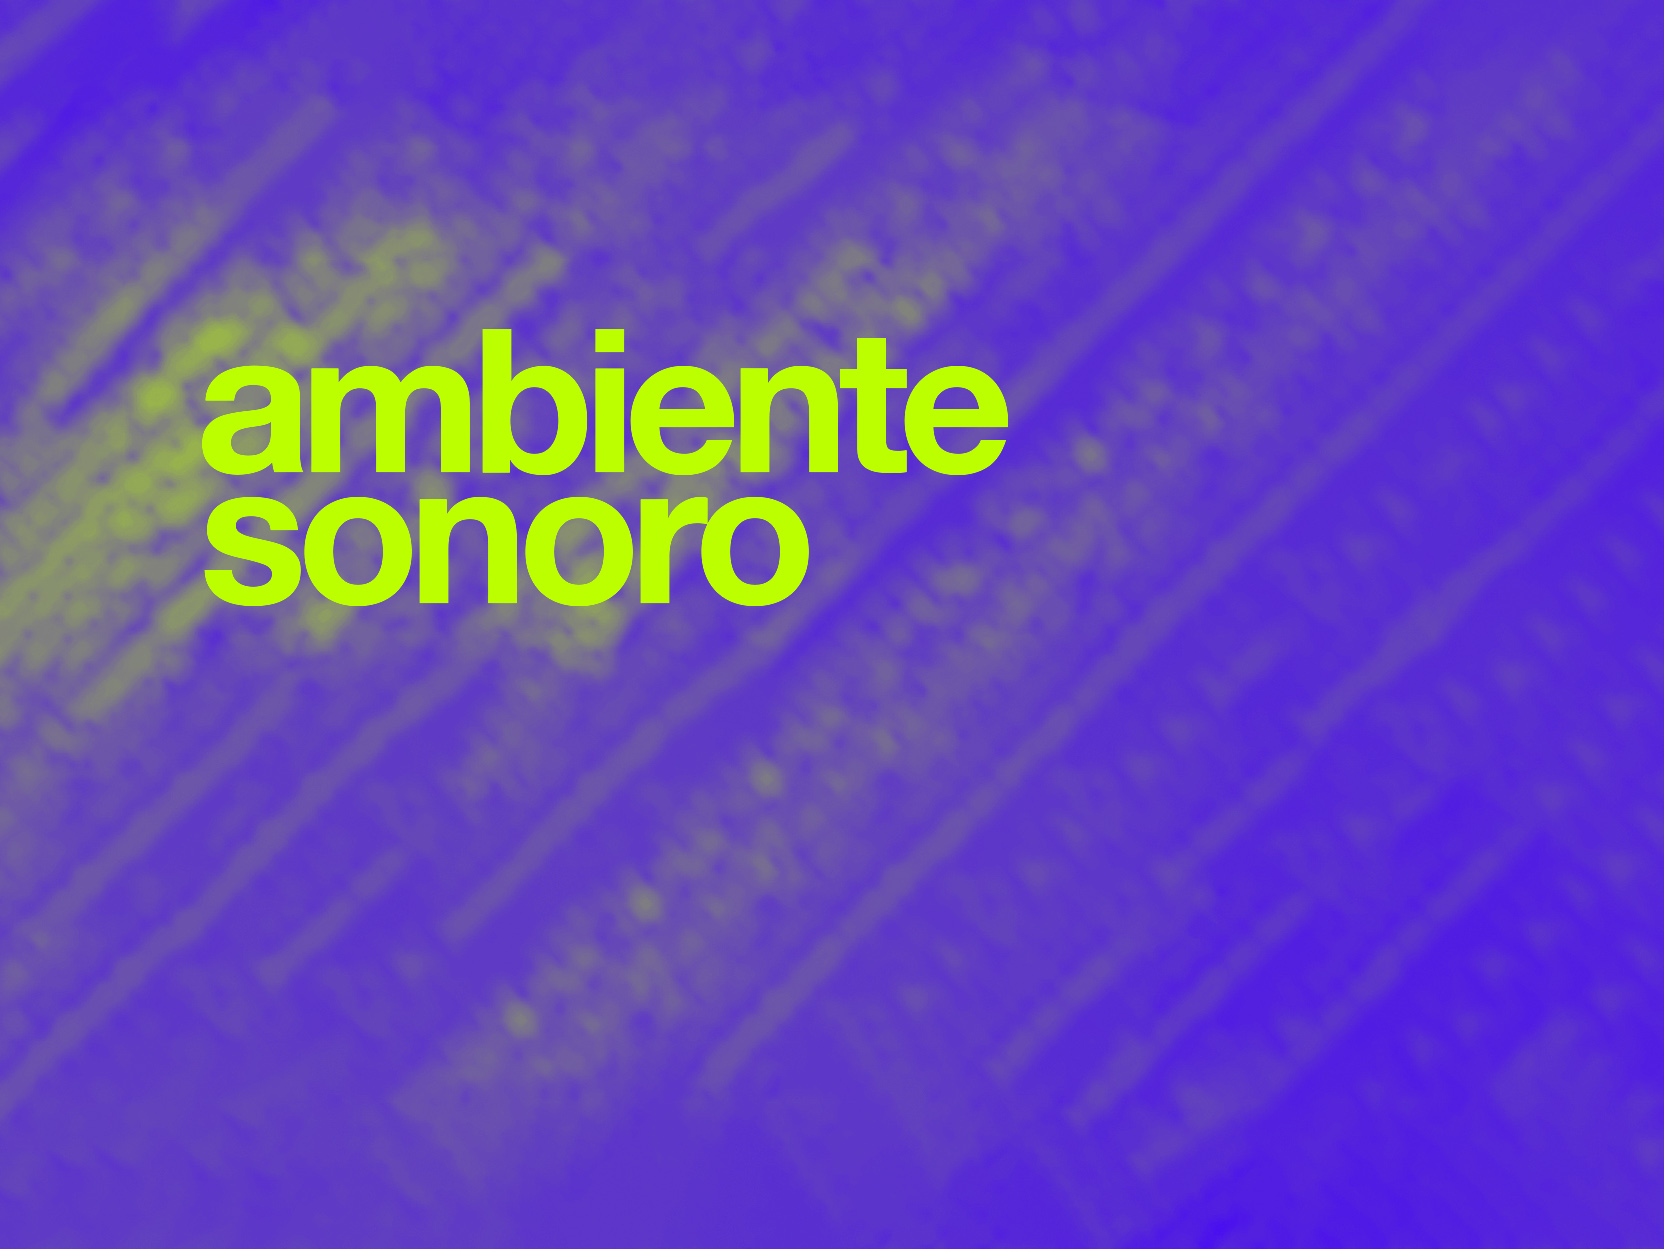 Title of ambiente sonoro with a background texture